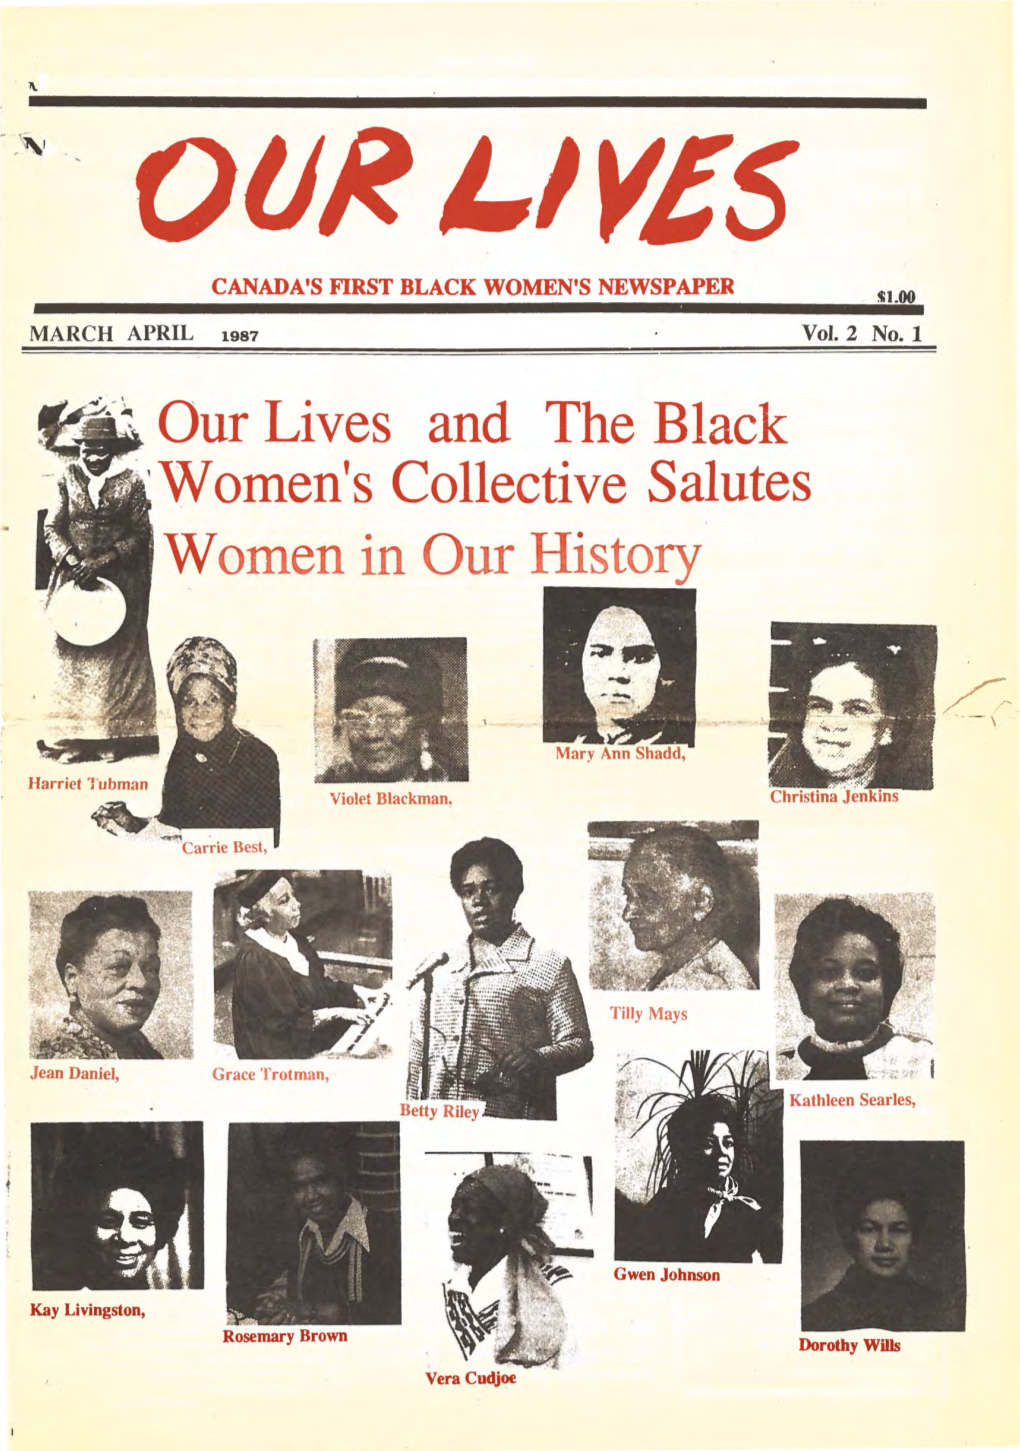 Our Lives and the Black ··Women's Collective Salutes Women in Our History